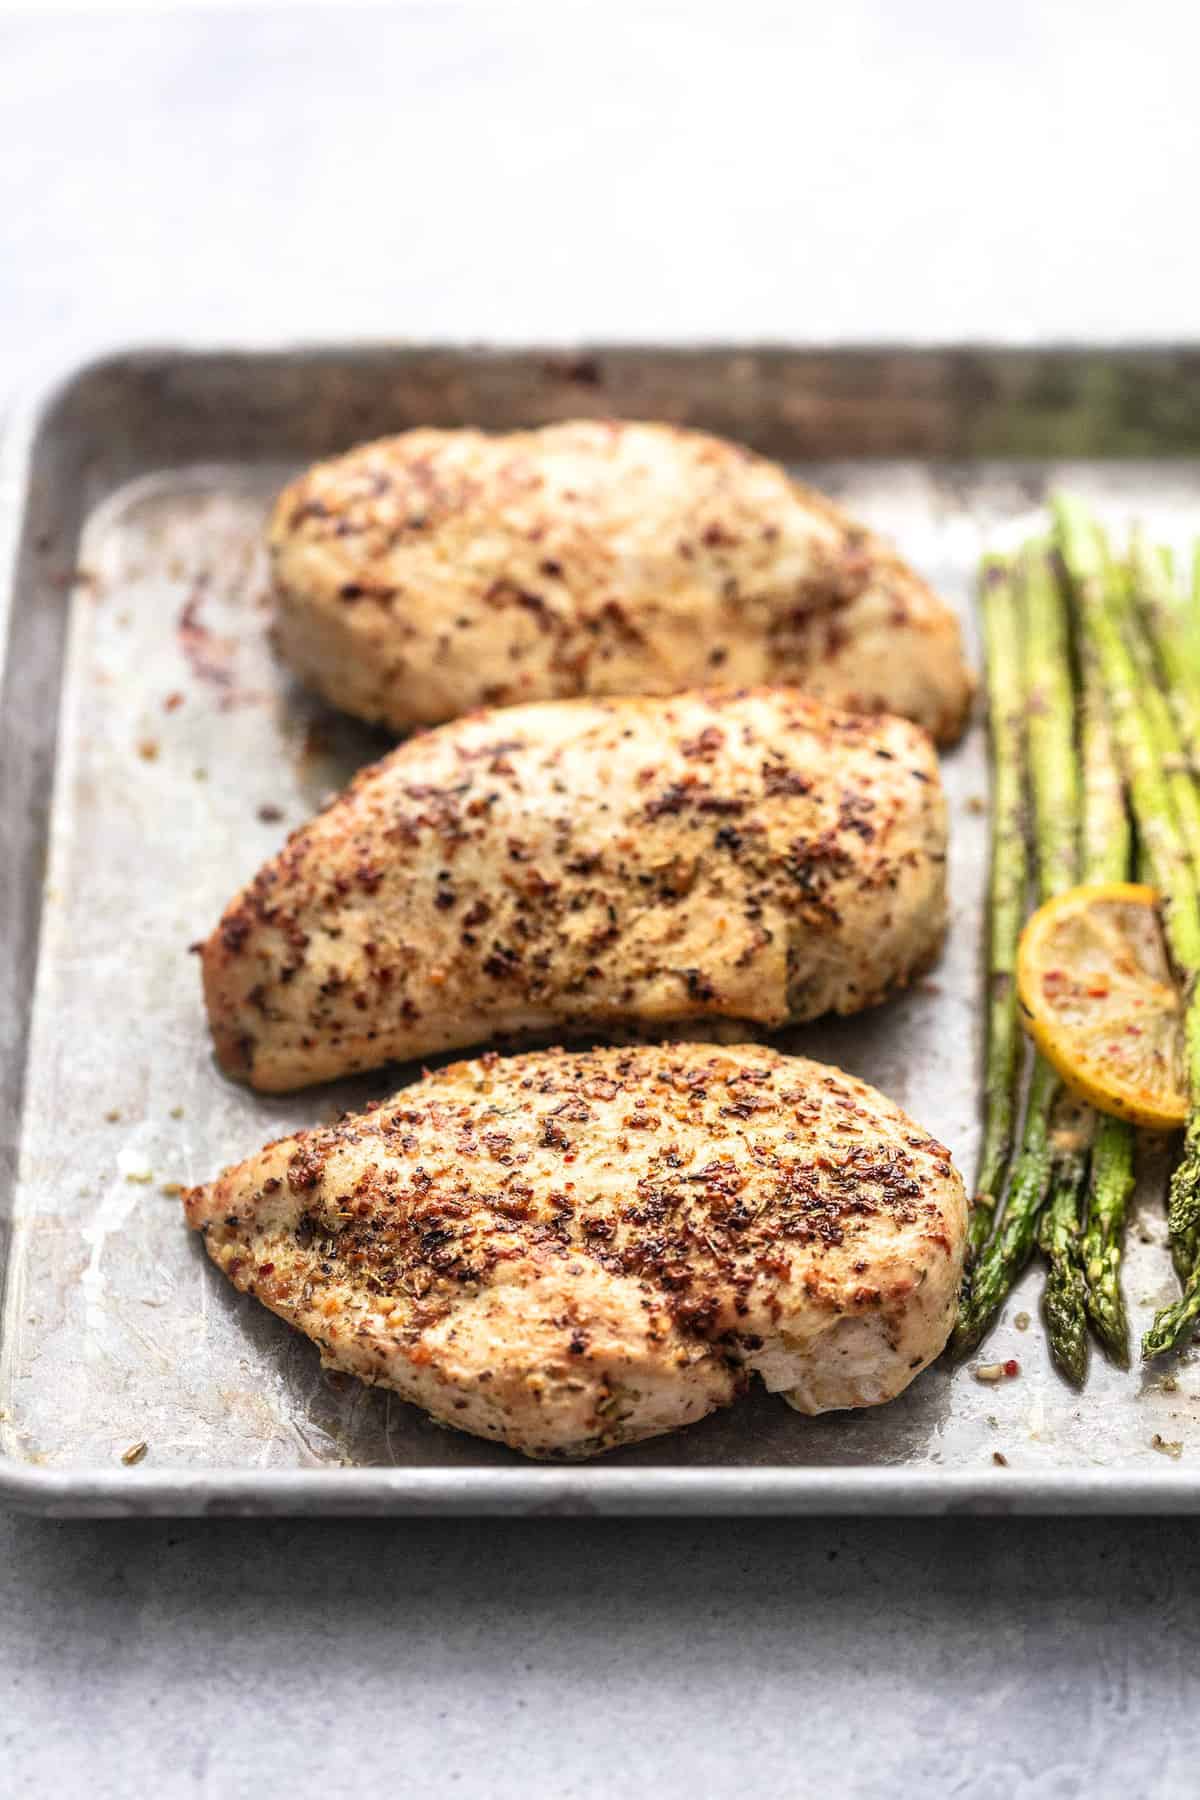 close up of chicken with asparagus barely visible on the side on a sheet pan.